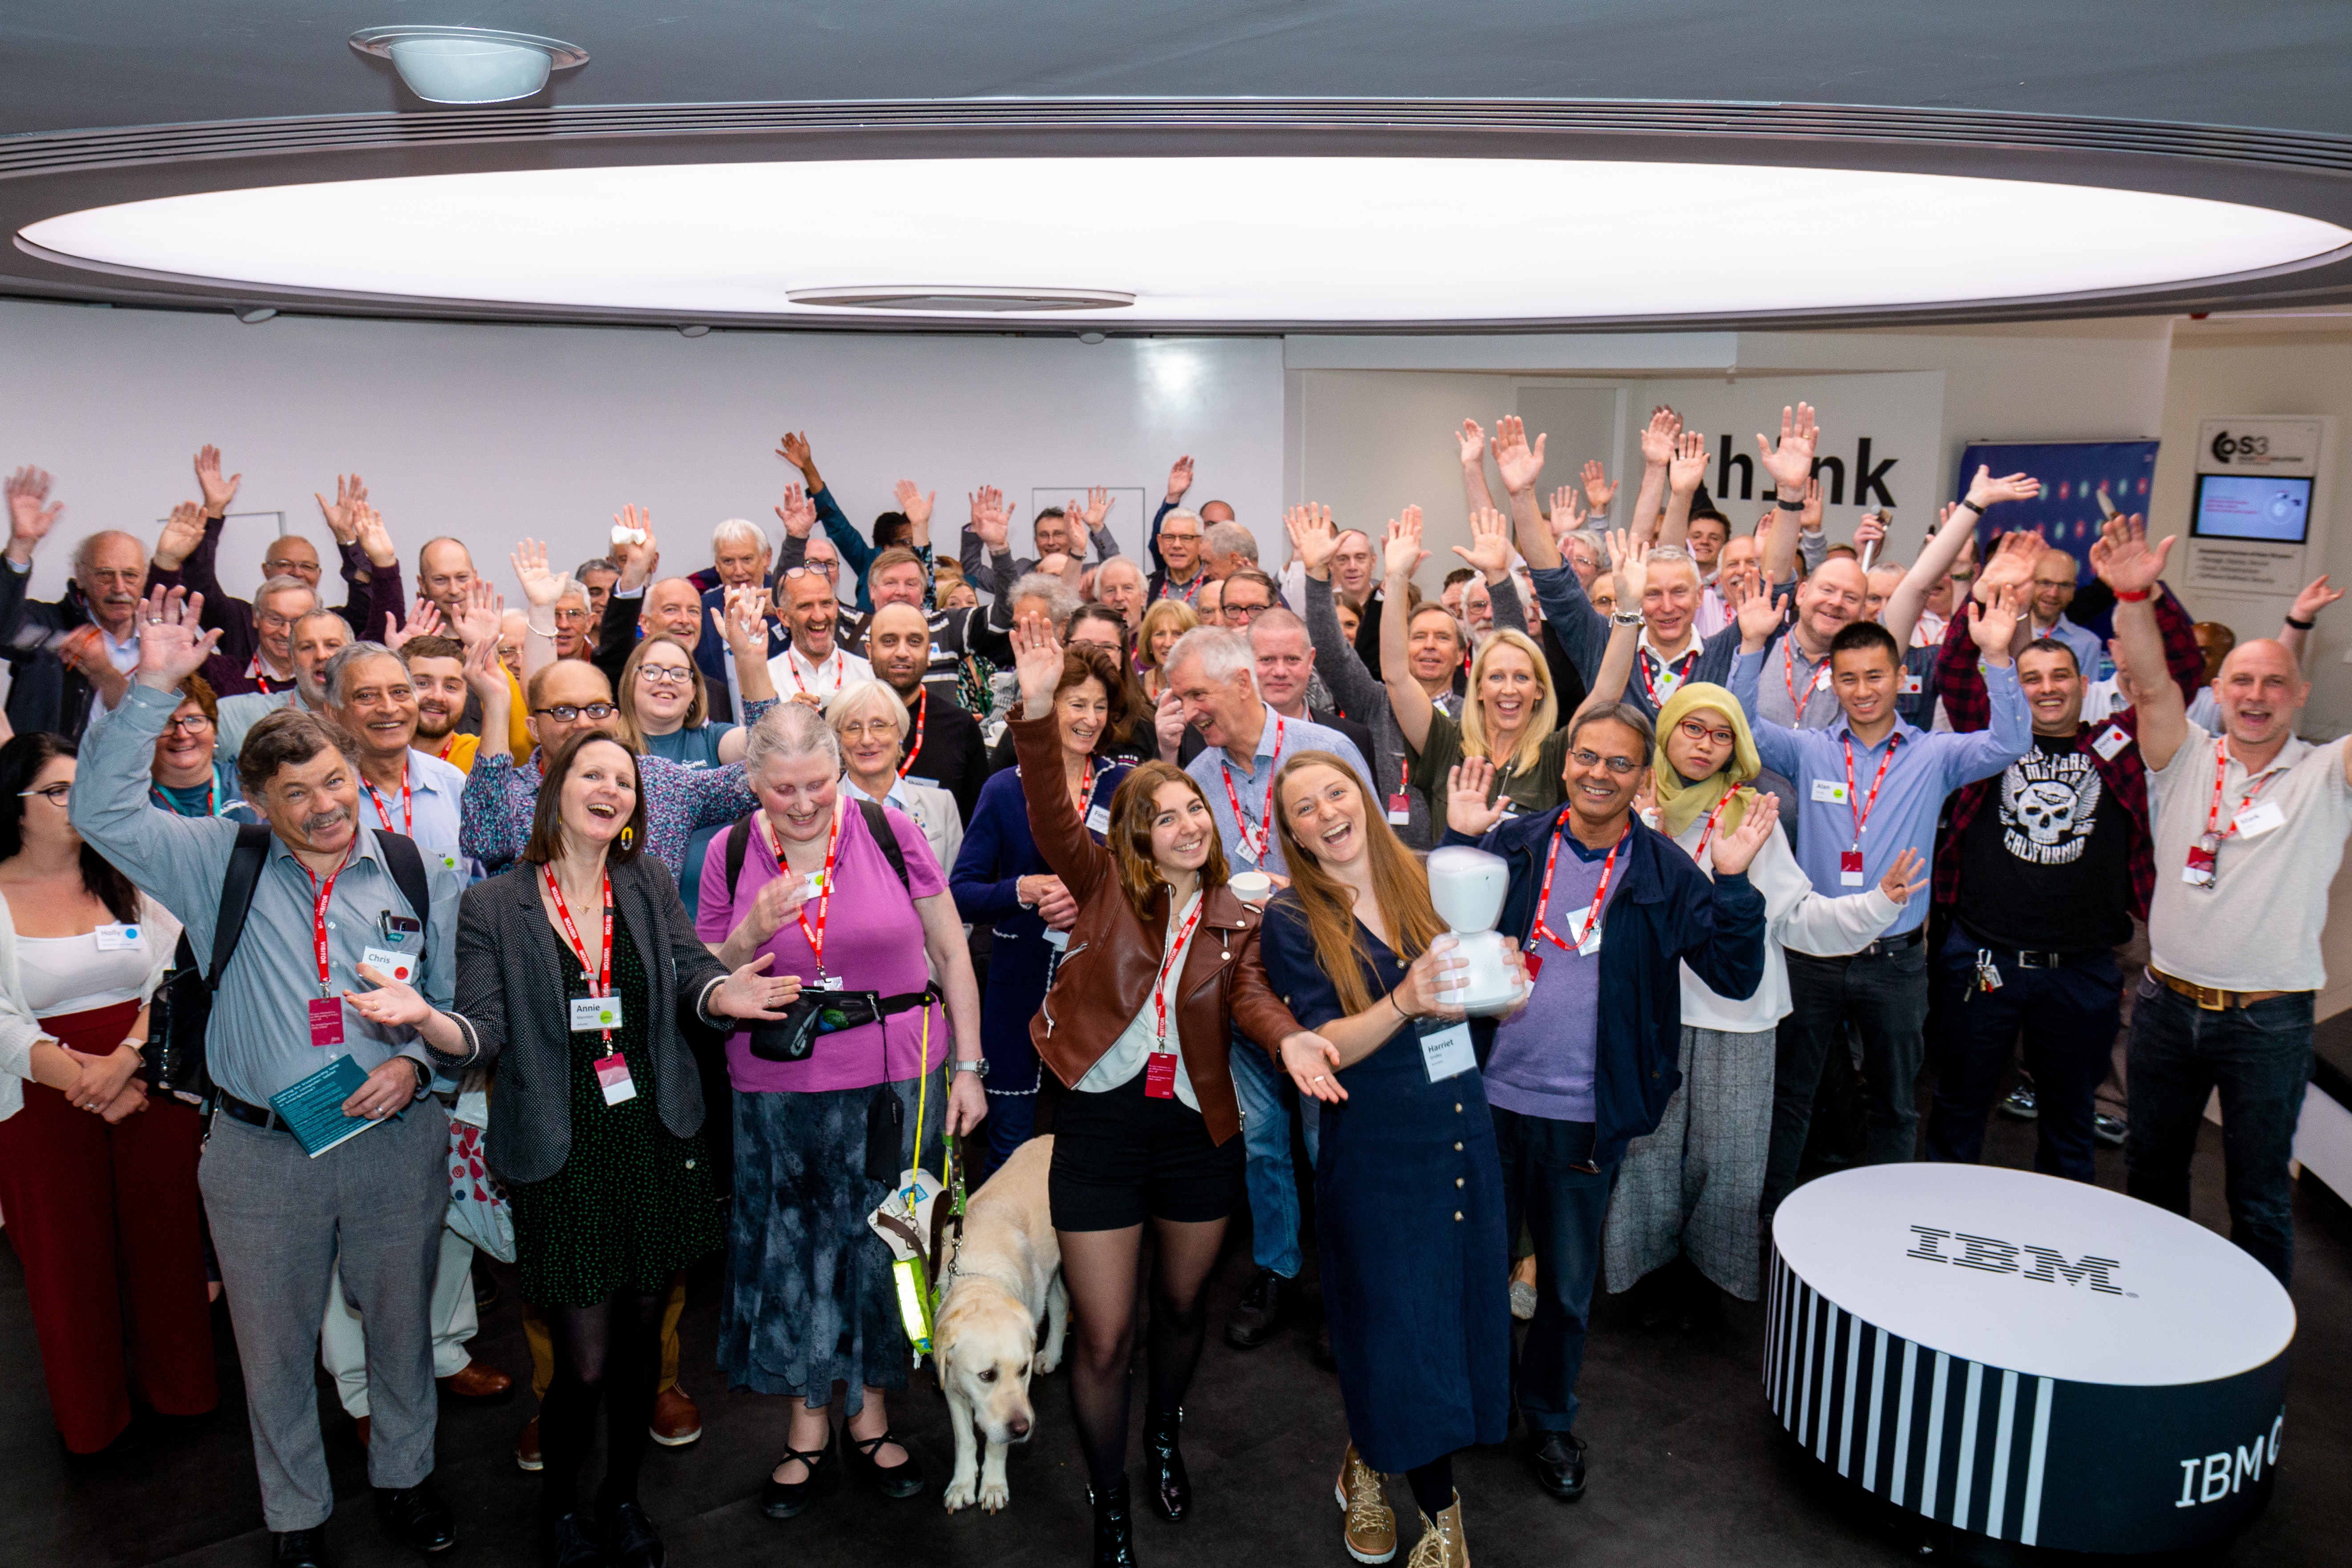 A picture of the 2019 volunteer events shows attendees together with arms in the air